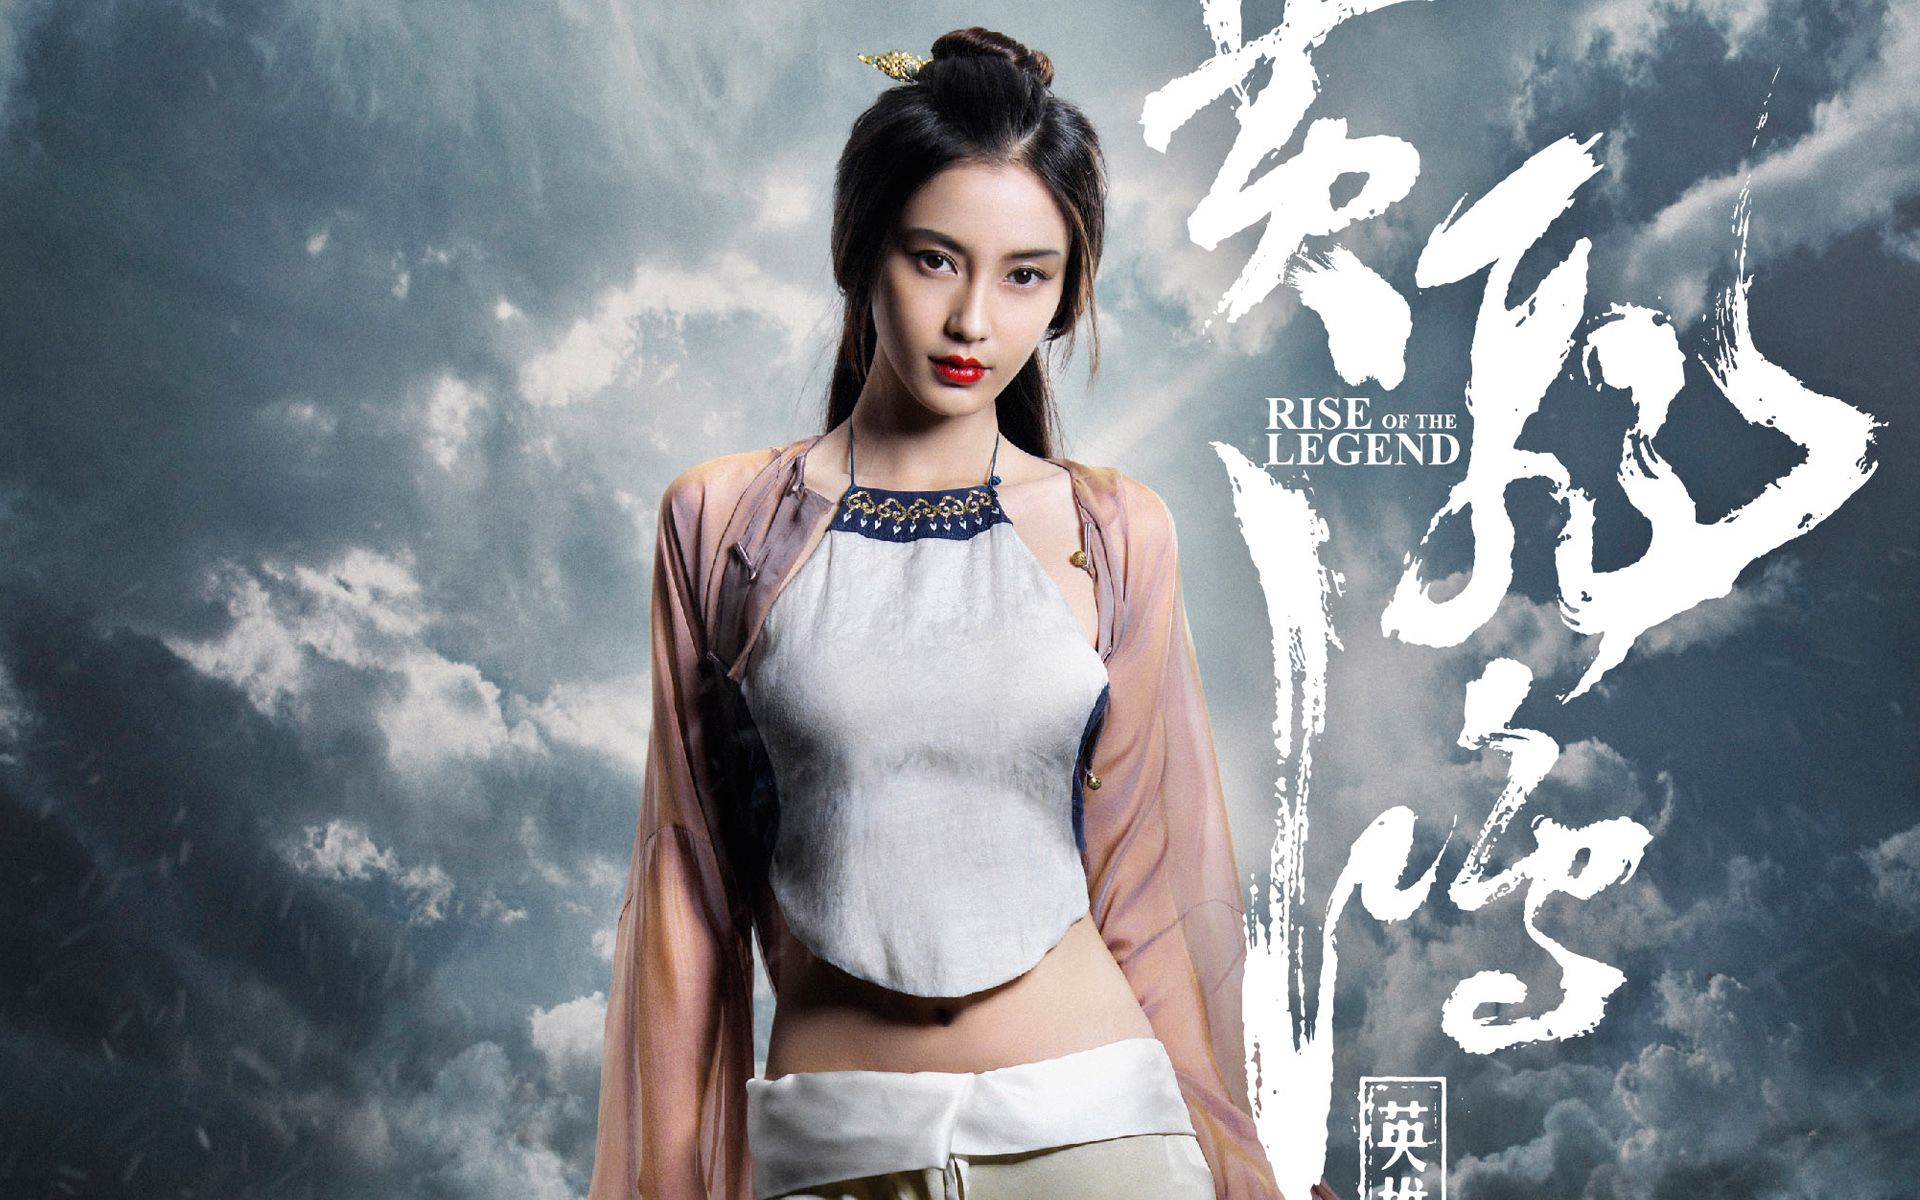 rise of the legend angelababy Google Search Model Celebrity